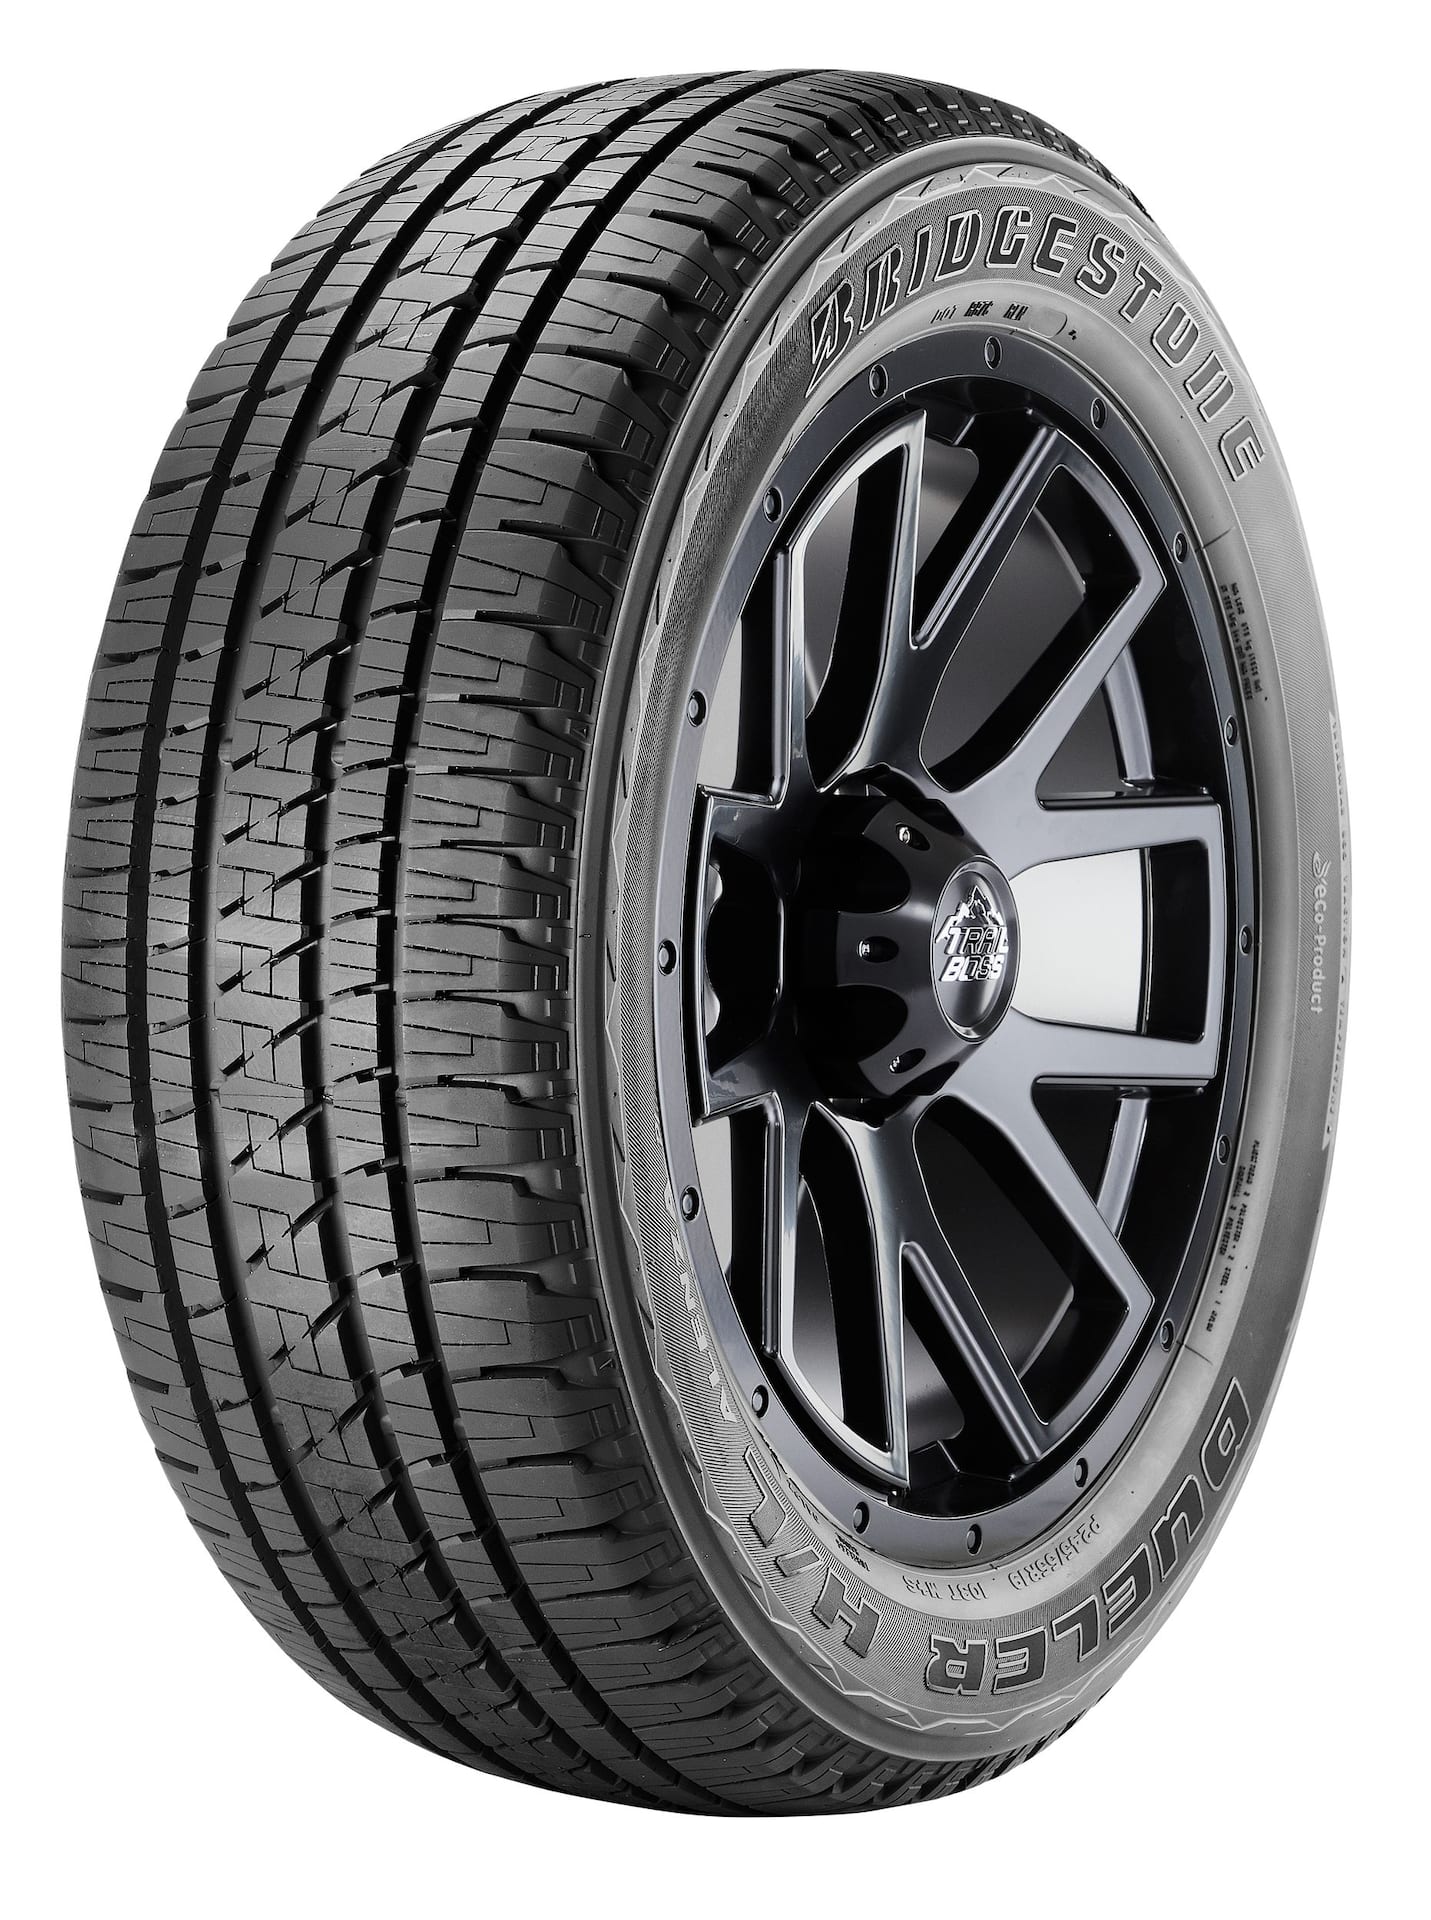 Continental CrossContact LX Sport | Canadian Tire